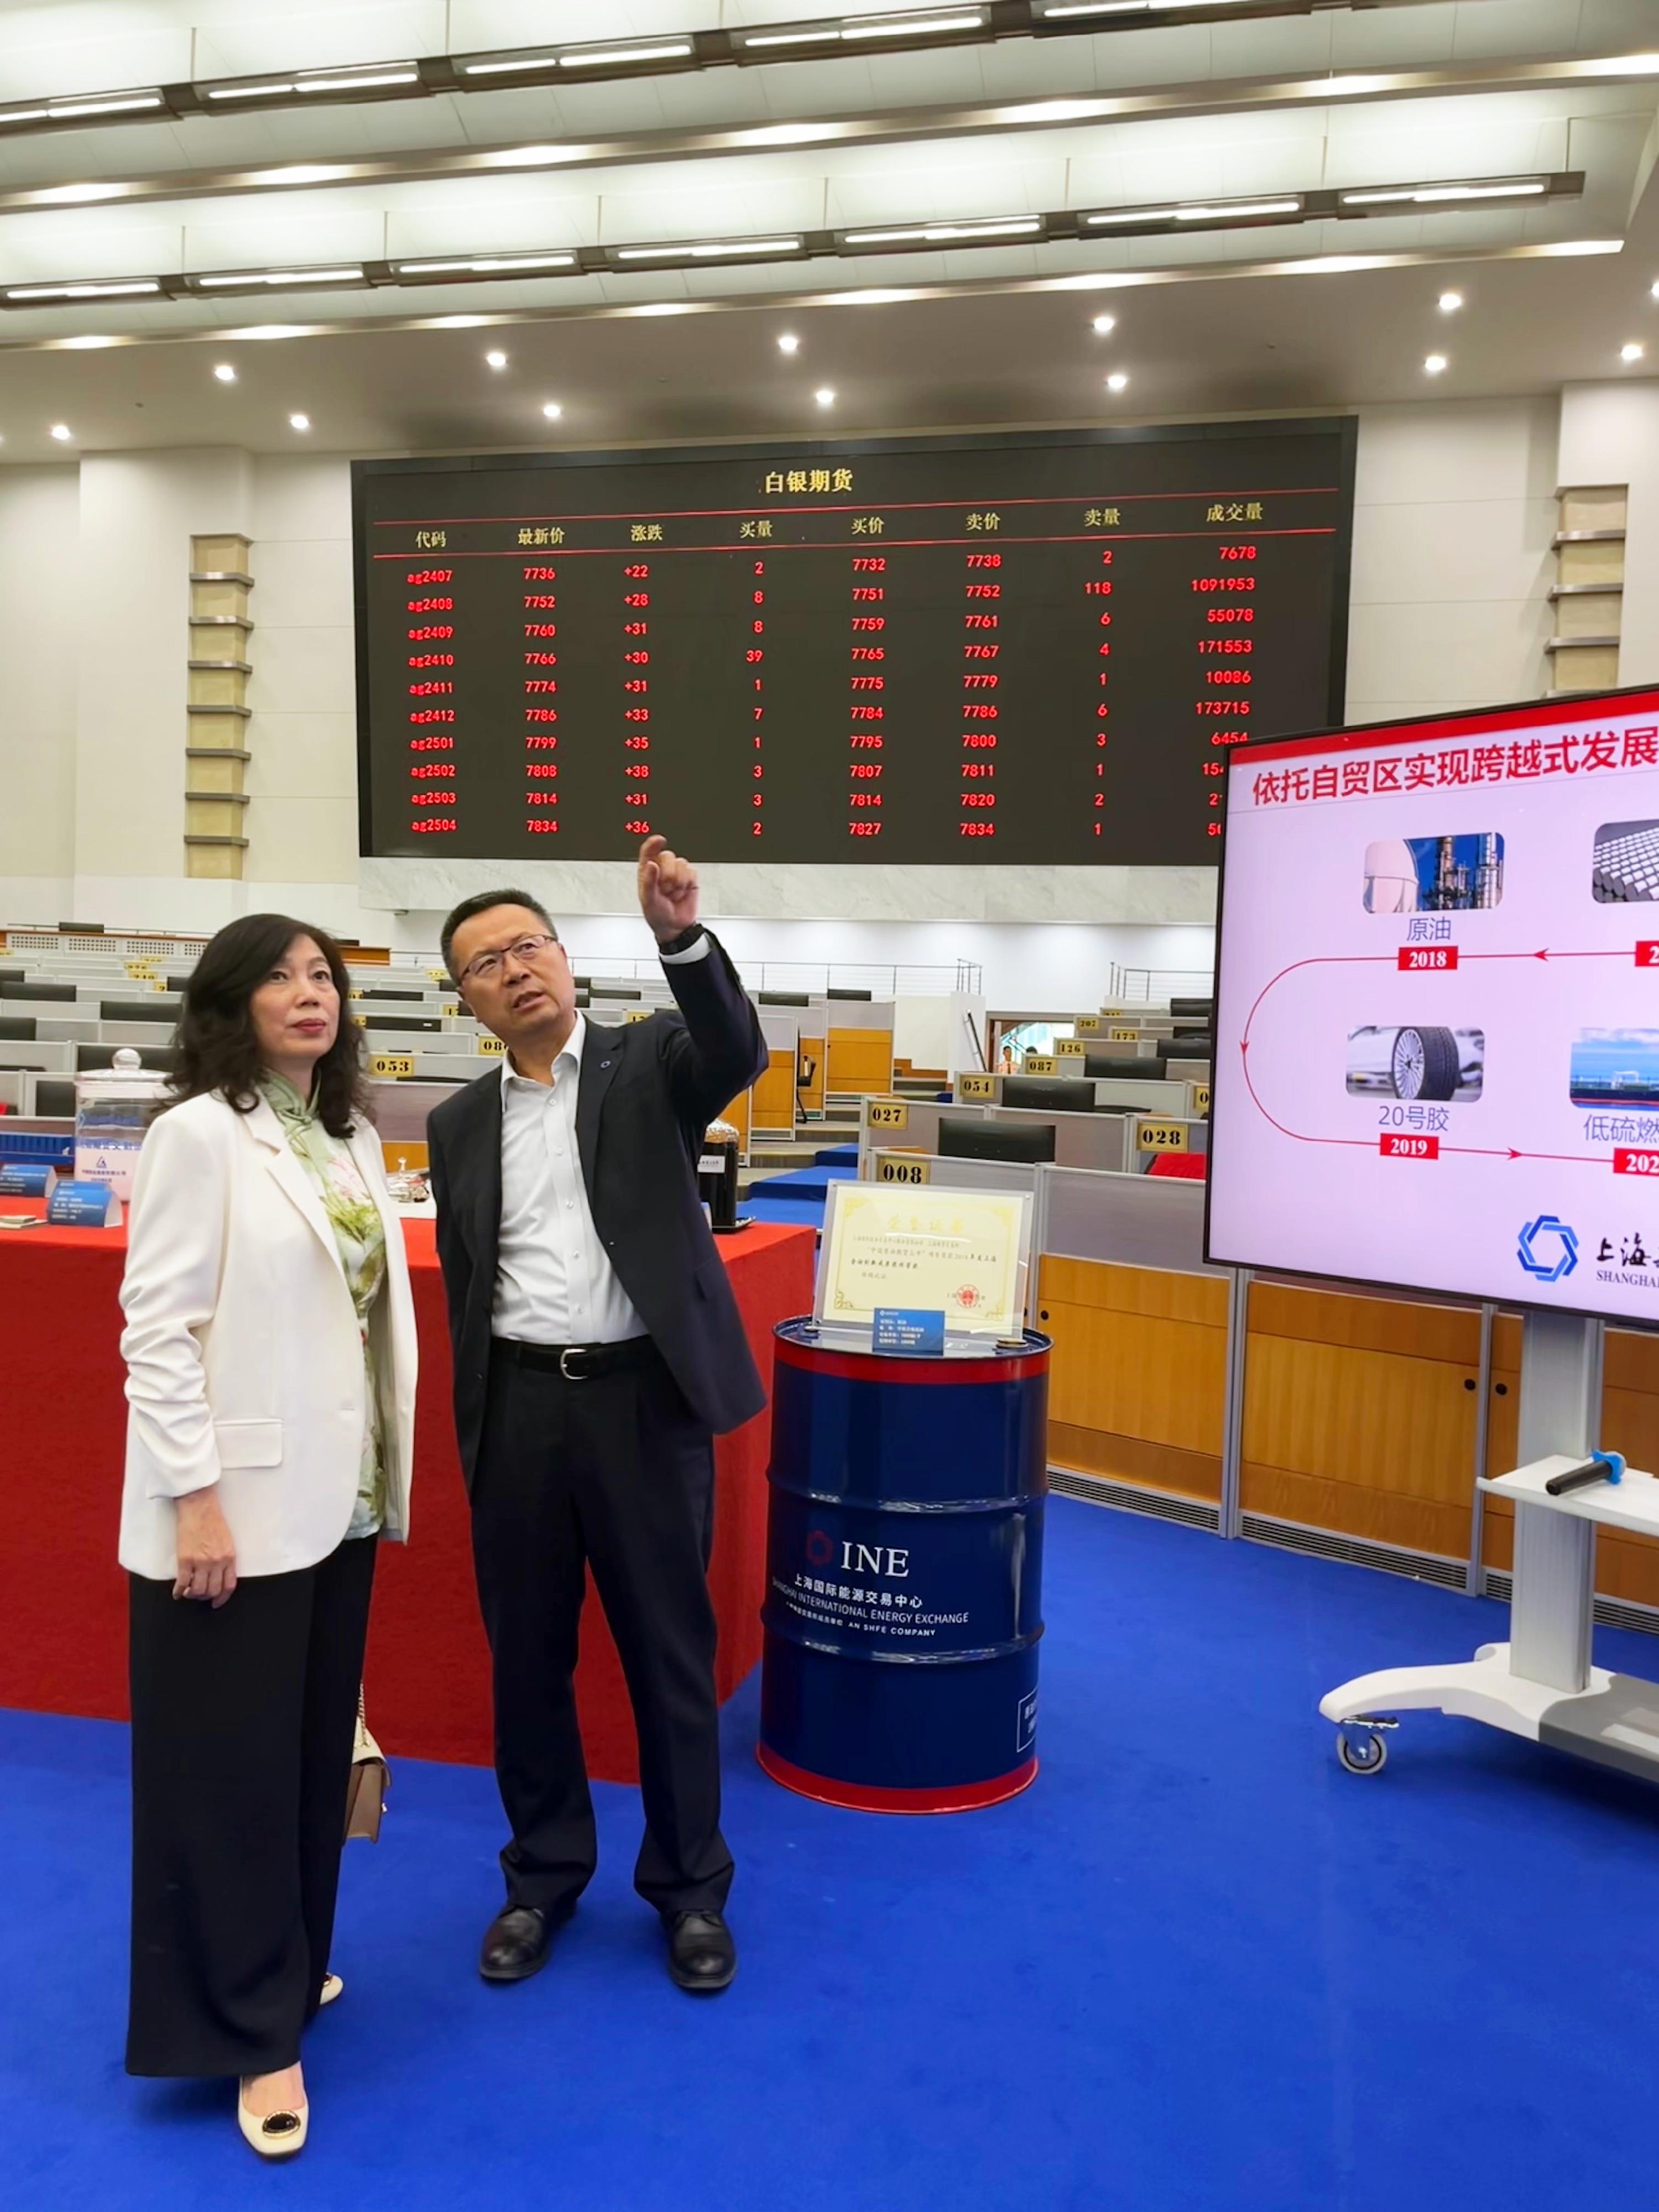 The Permanent Secretary for Financial Services and the Treasury (Financial Services), Ms Salina Yan, visited the Shanghai Futures Exchange in Shanghai yesterday (June 18). Photo shows Ms Yan (left) with the Chief Executive Officer of the Shanghai Futures Exchange, Mr Wang Fenghai (right).